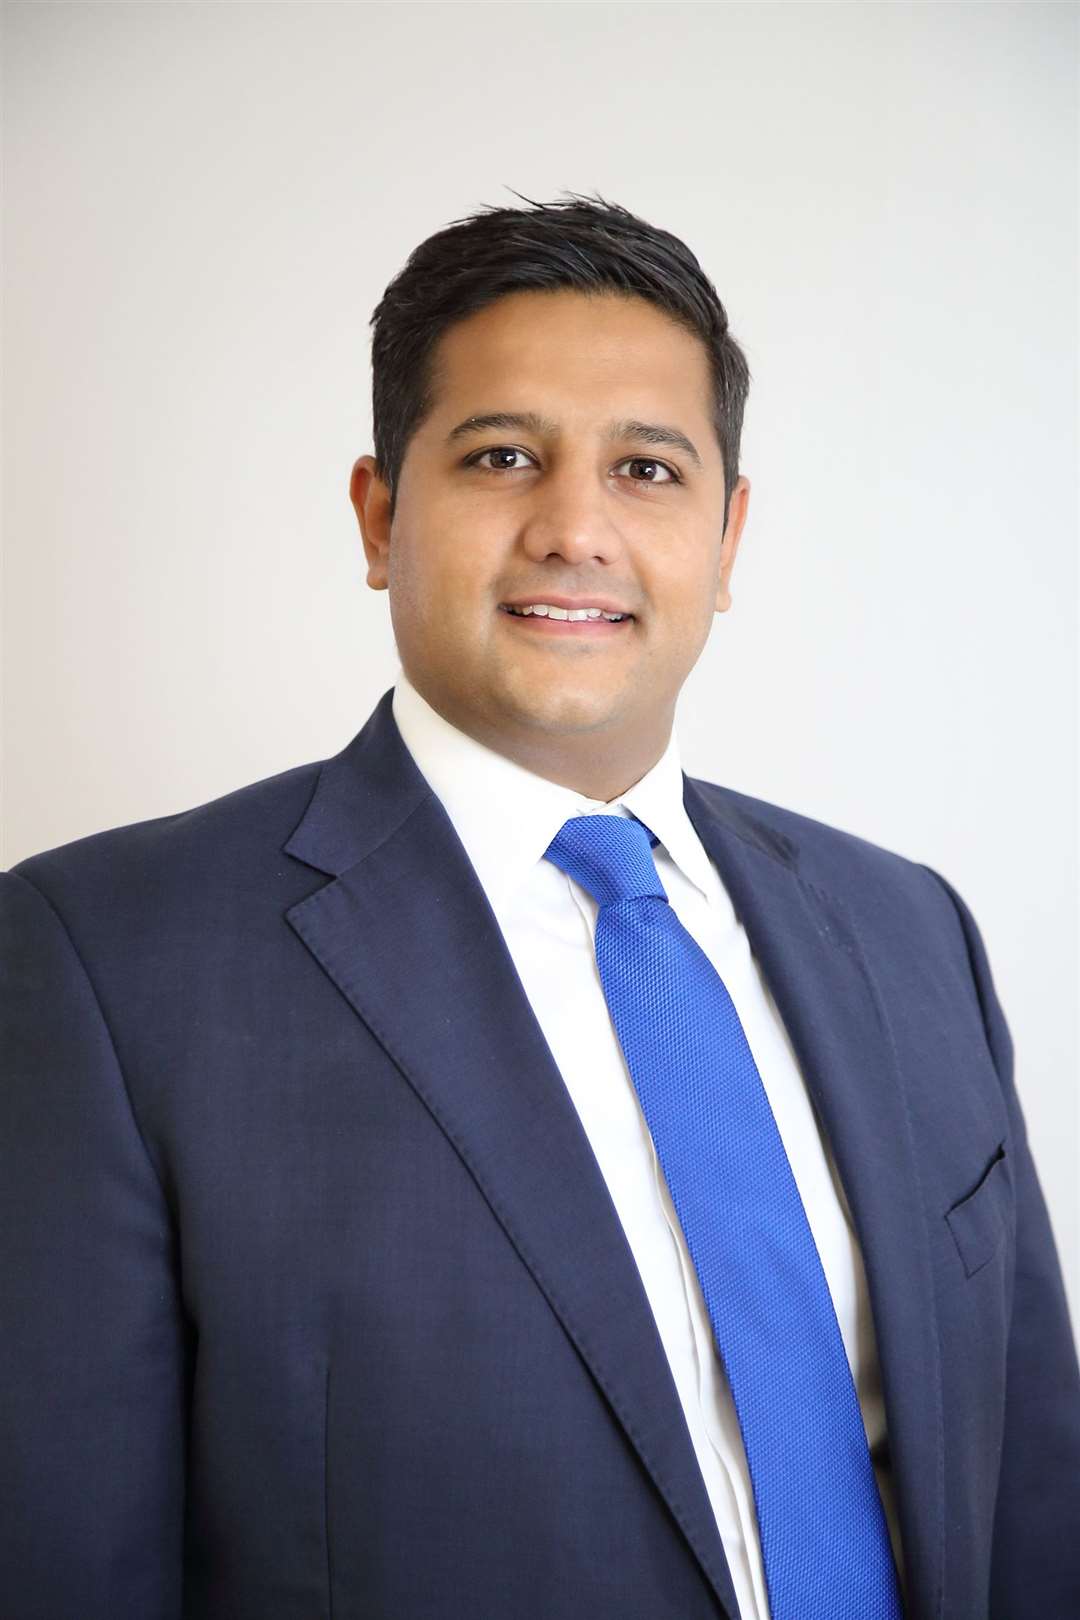 Cllr Samir Jassal is a Gravesham councillor, former Conservative parliamentary candidate and Tory party donor who was a consultant for a company which won a £100m PPE contract from the government